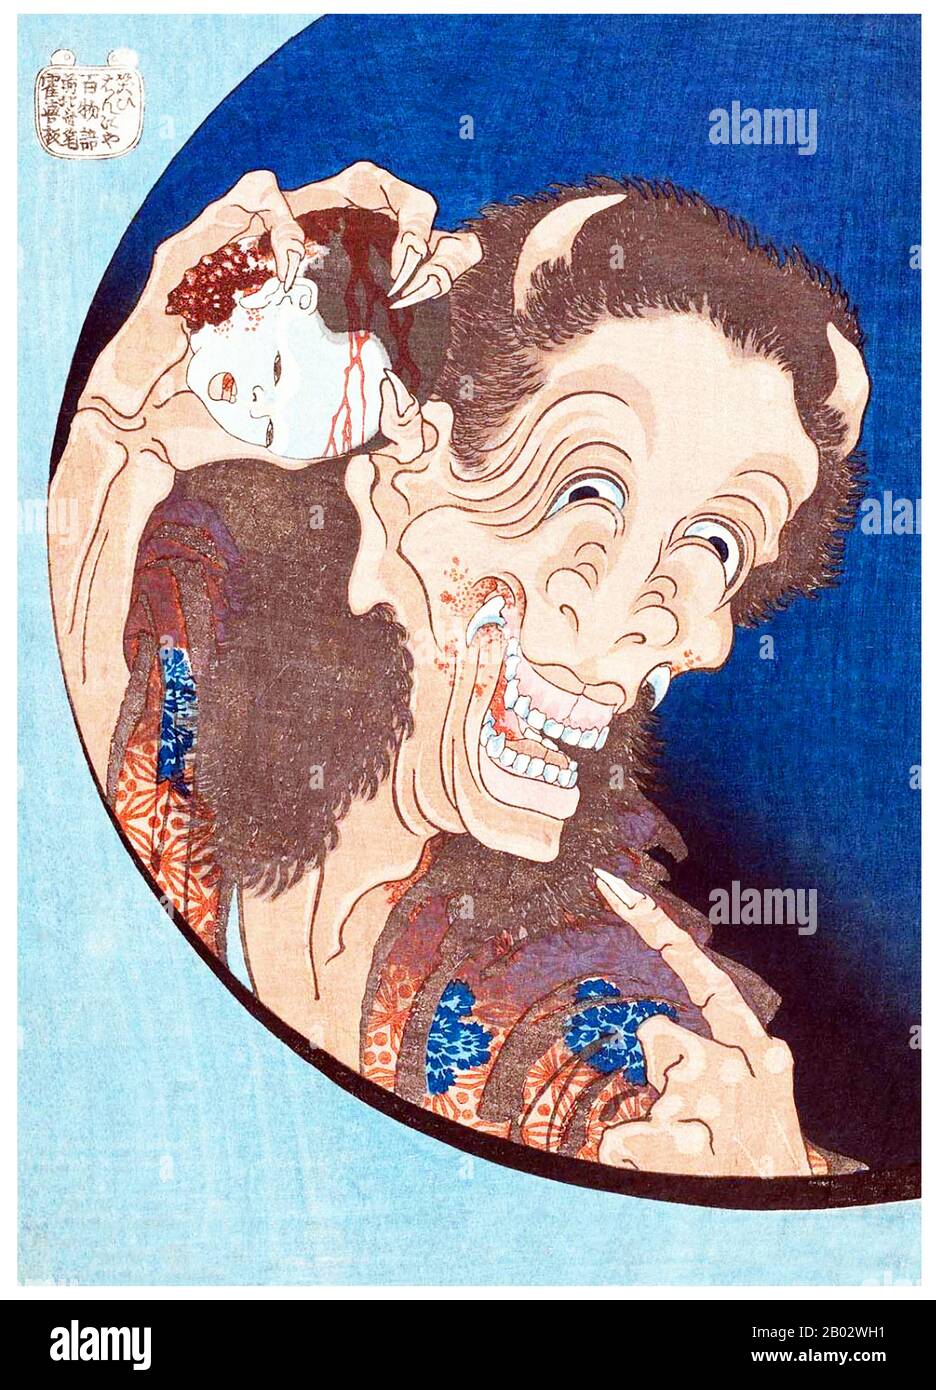 Katsushika Hokusai (October 31, 1760 – May 10, 1849) was a Japanese artist, ukiyo-e painter and printmaker of the Edo period. He was influenced by such painters as Sesshu, and other styles of Chinese painting. Born in Edo (now Tokyo), Hokusai is best known as author of the woodblock print series Thirty-six Views of Mount Fuji (Fugaku Sanjūroku-kei, c. 1831) which includes the internationally recognized print, The Great Wave off Kanagawa, created during the 1820s.  Hokusai created the 'Thirty-Six Views' both as a response to a domestic travel boom and as part of a personal obsession with Mount Stock Photo